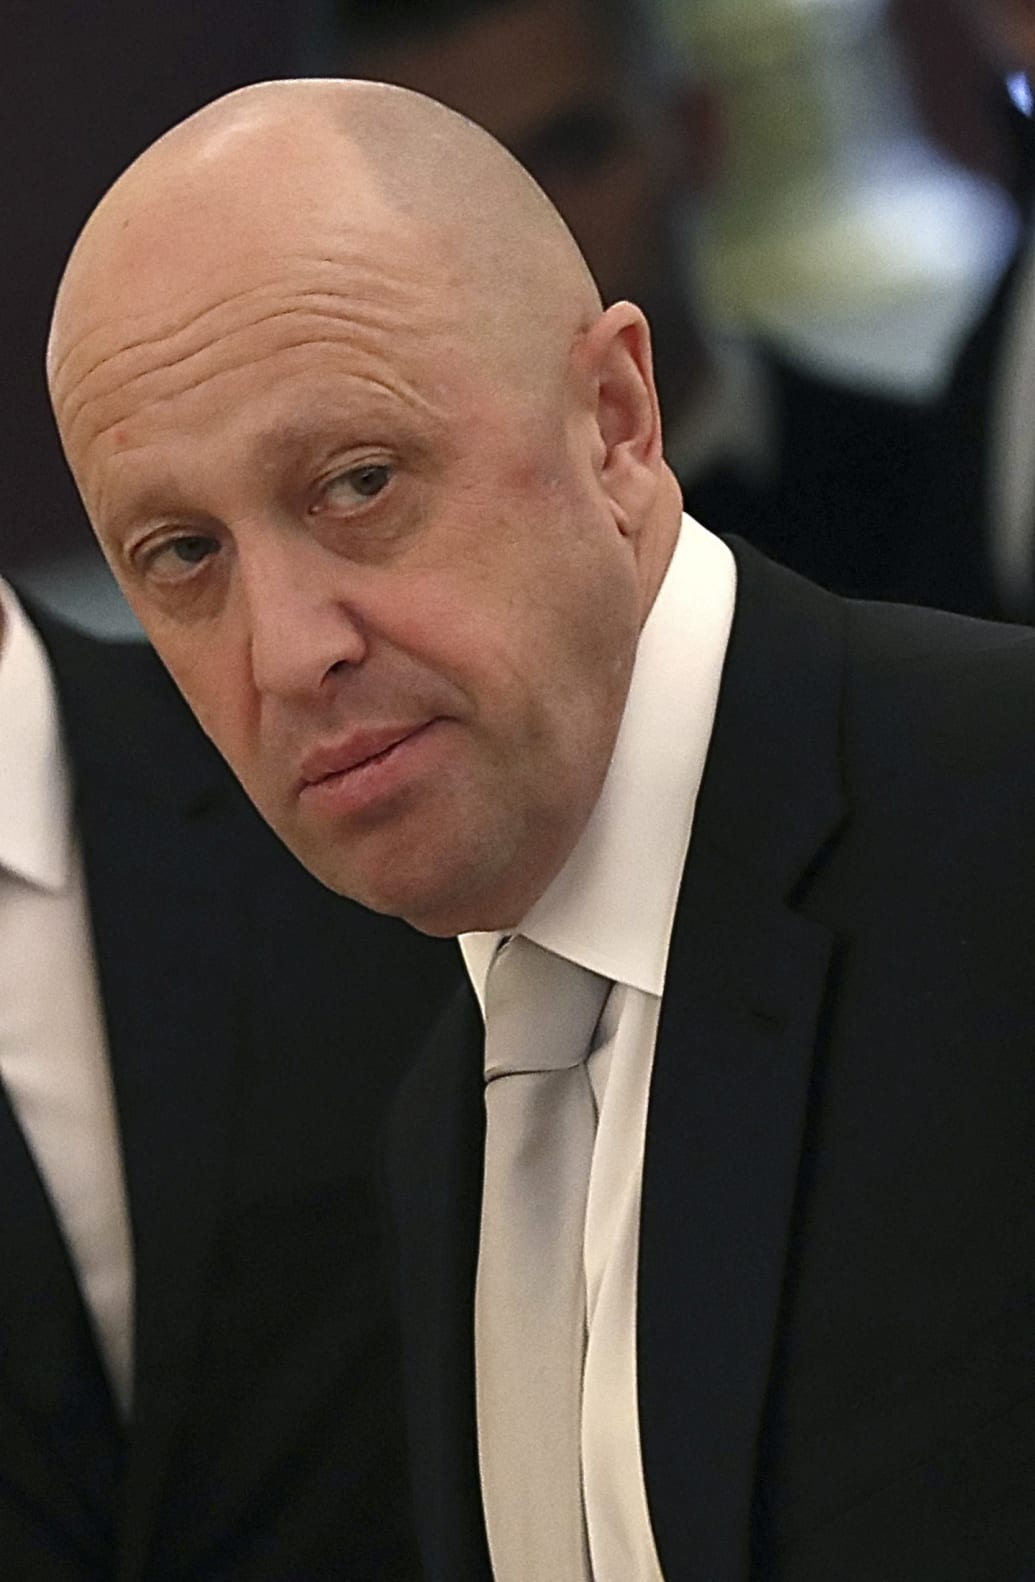 Yevgeny Prigozhin looks on before a meeting of Russian President Vladimir Putin and his Chinese counterpart Xi Jinping with representatives of civic organisations, business and media communities at the Kremlin in Moscow, Russia July 4, 2017.